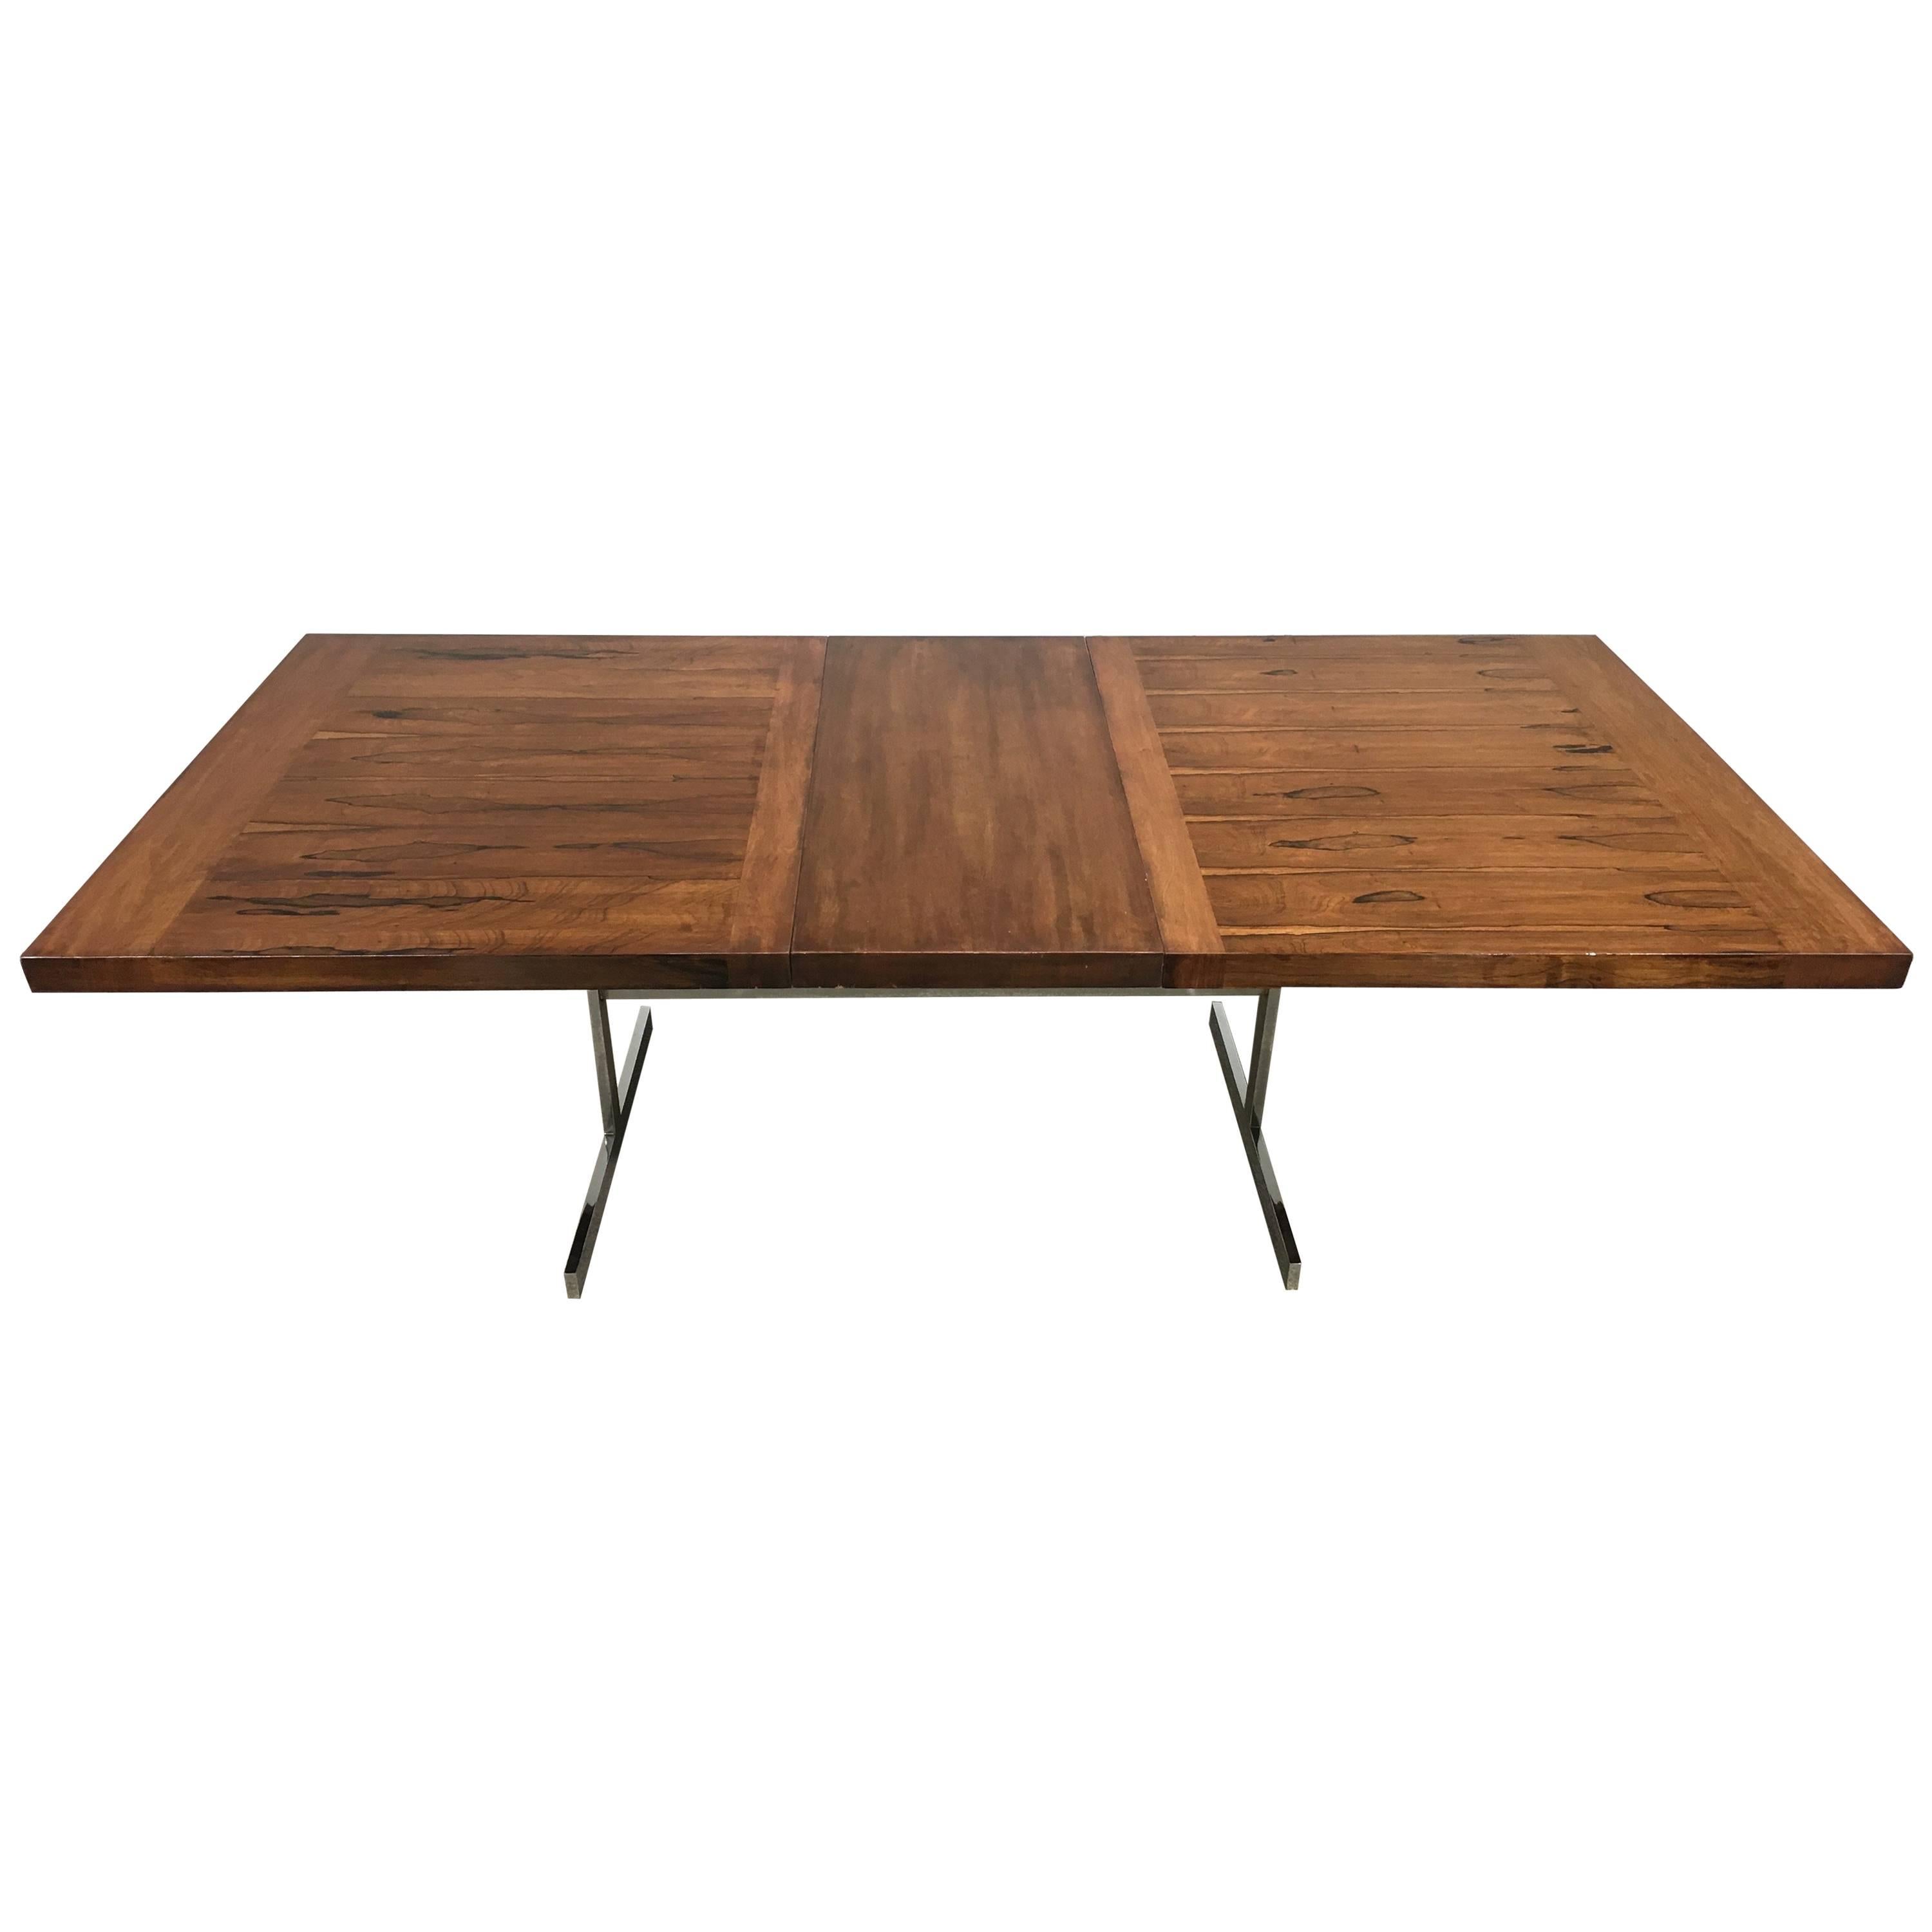 Milo Baughman Style Rosewood, Walnut and Chrome Expanding Dining Table